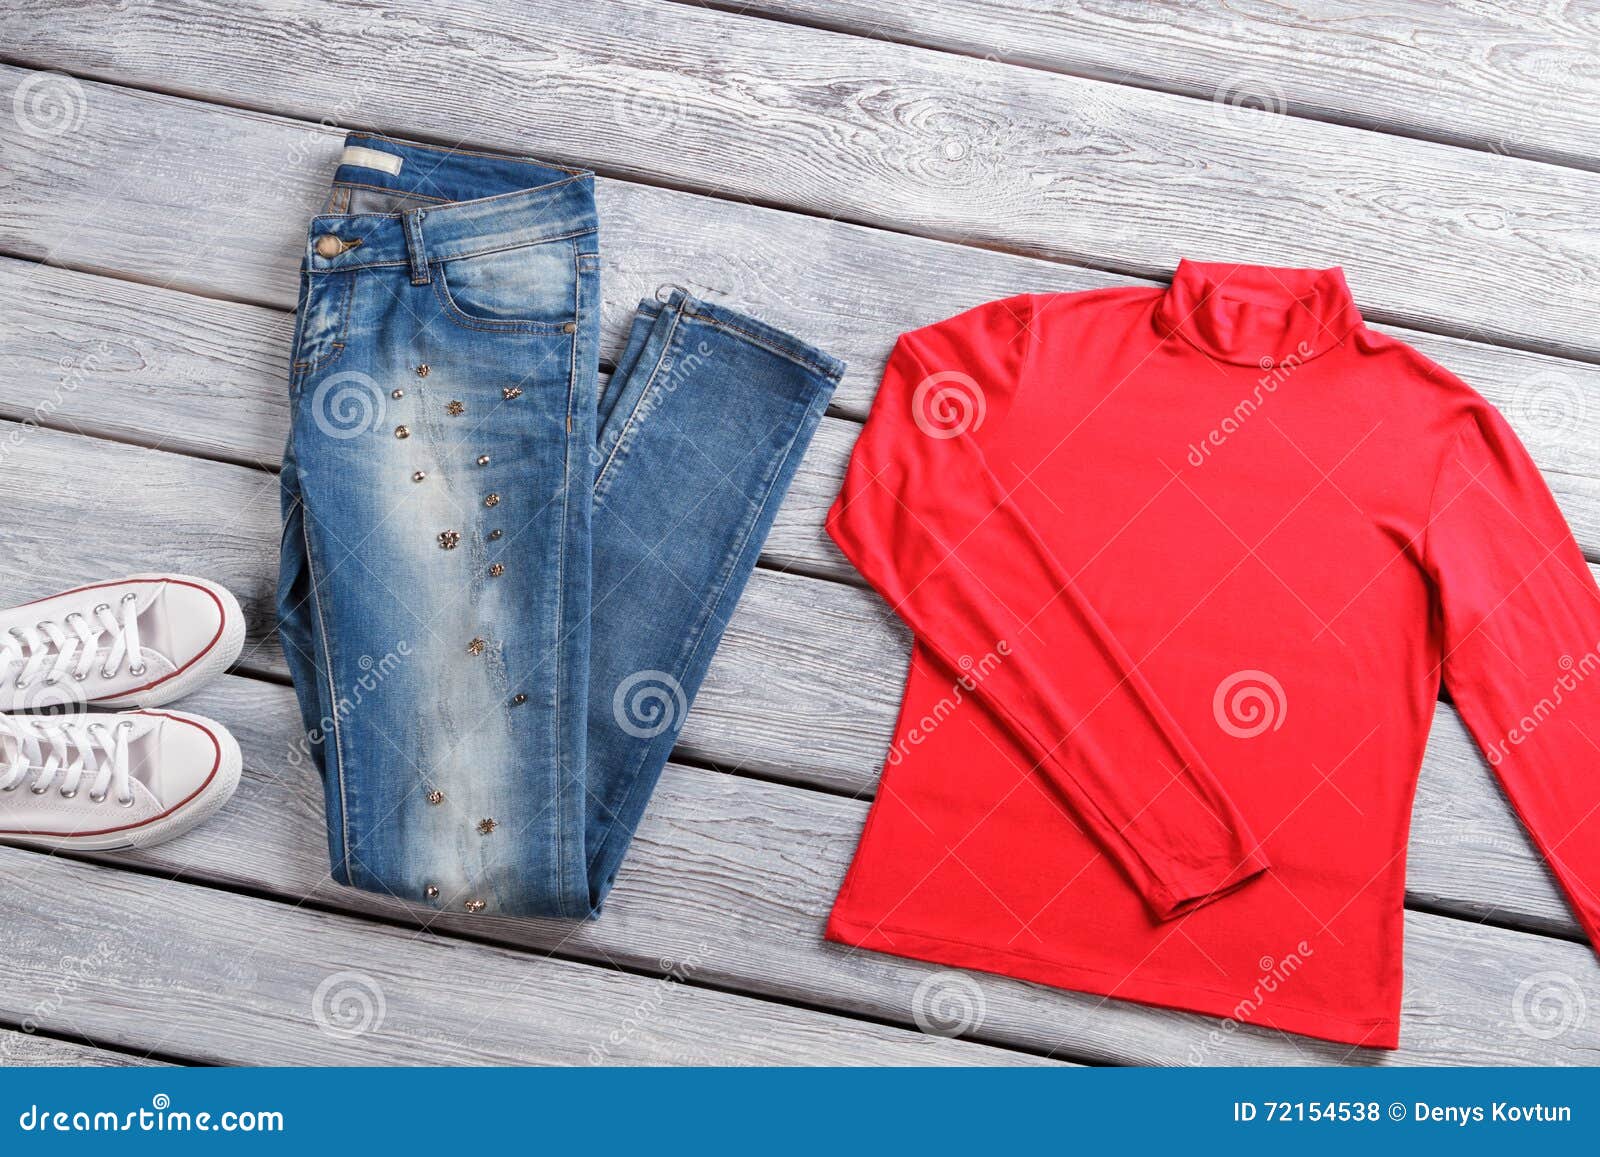 Red top and blue jeans. stock photo. Image of rubber - 72154538